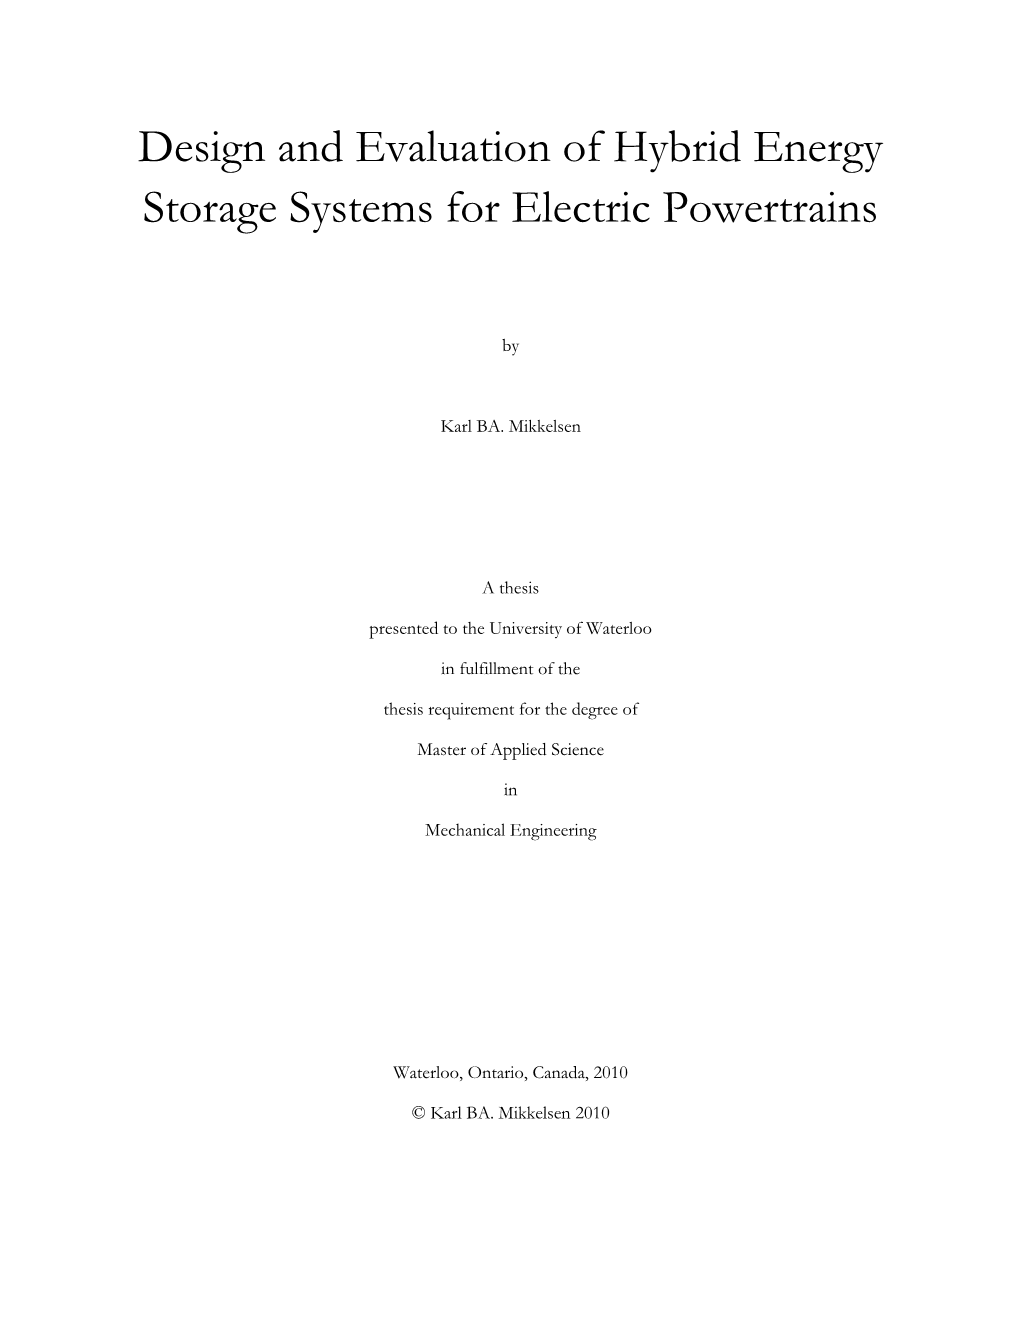 Design and Evaluation of Hybrid Energy Storage Systems for Electric Powertrains